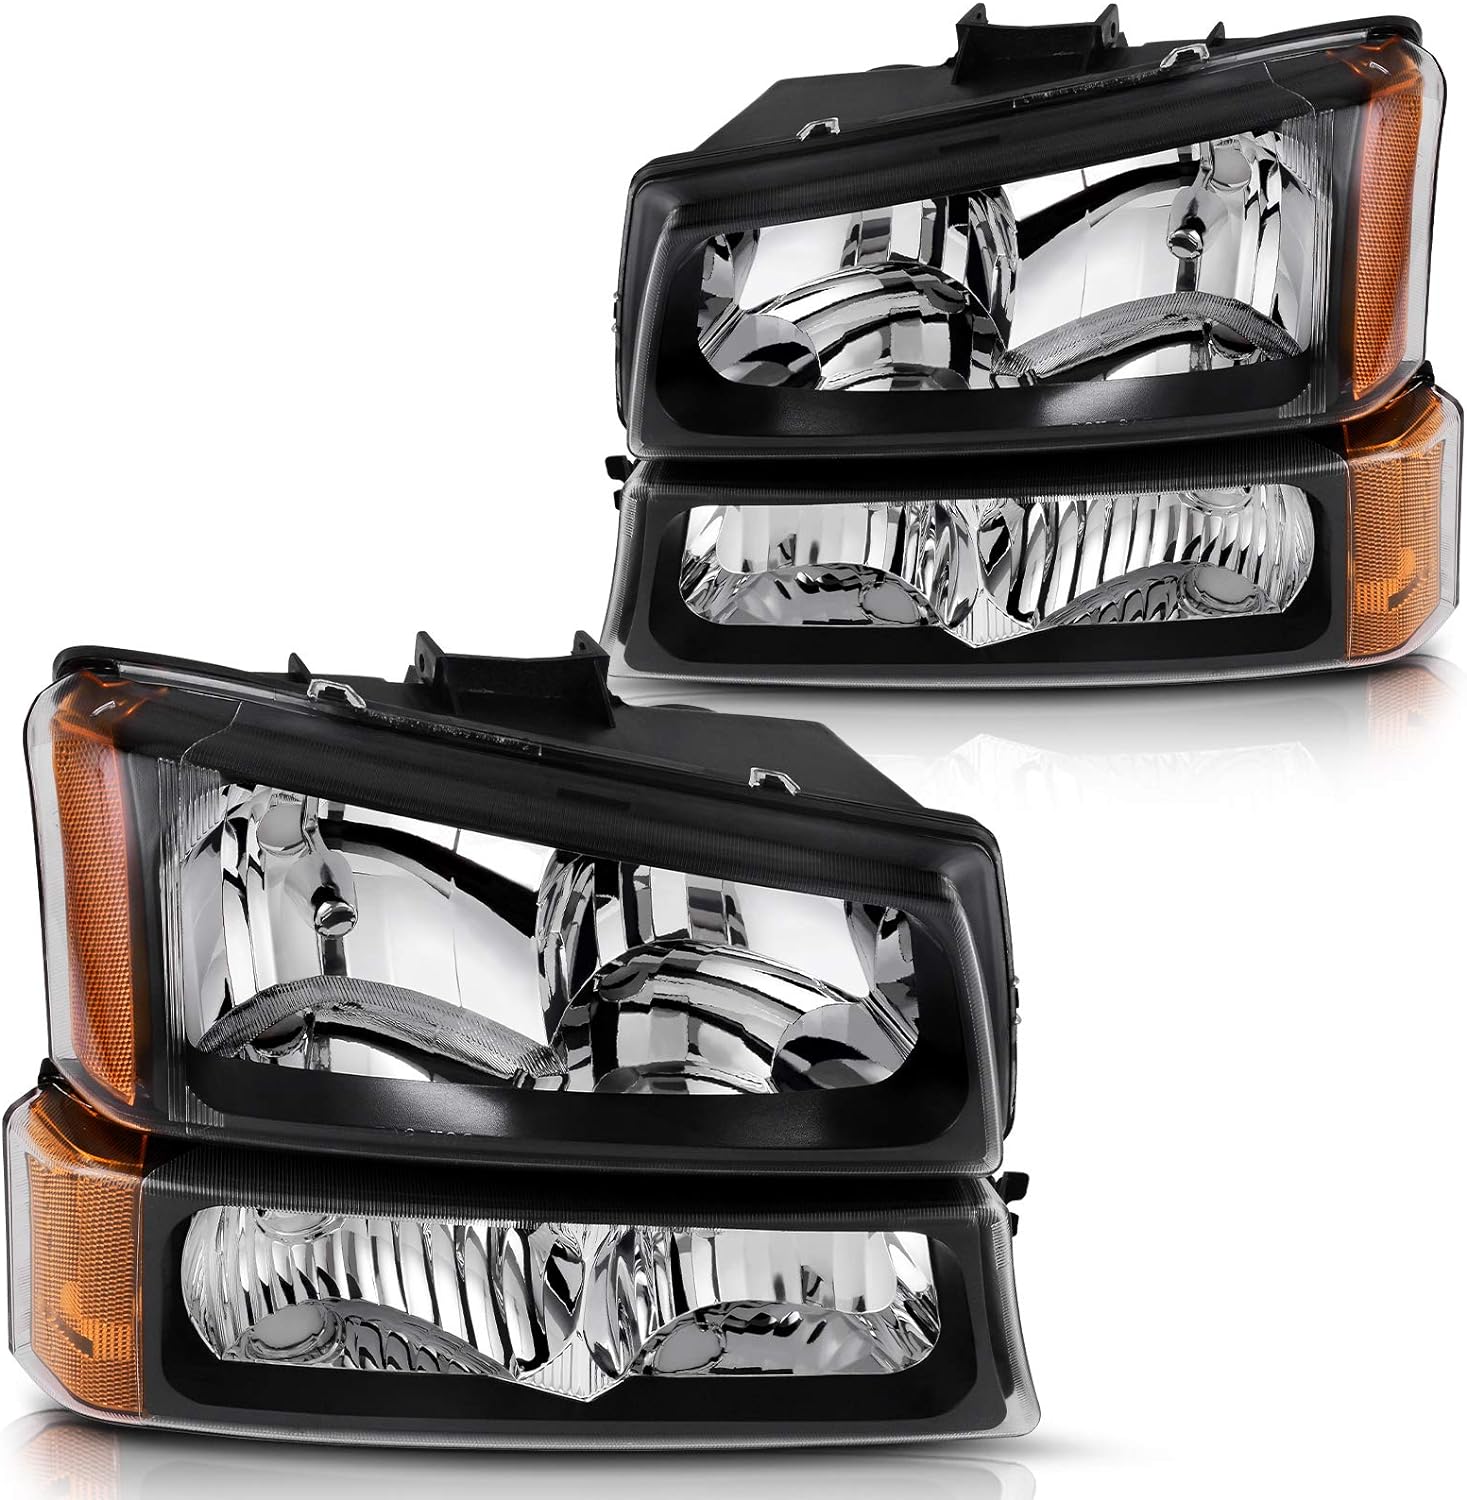 DWVO Headlights Assembly Compatible with 2003-2006 Chevy Silverado Avalanche 1500 2500 3500 (Black Housing Clear Lens)